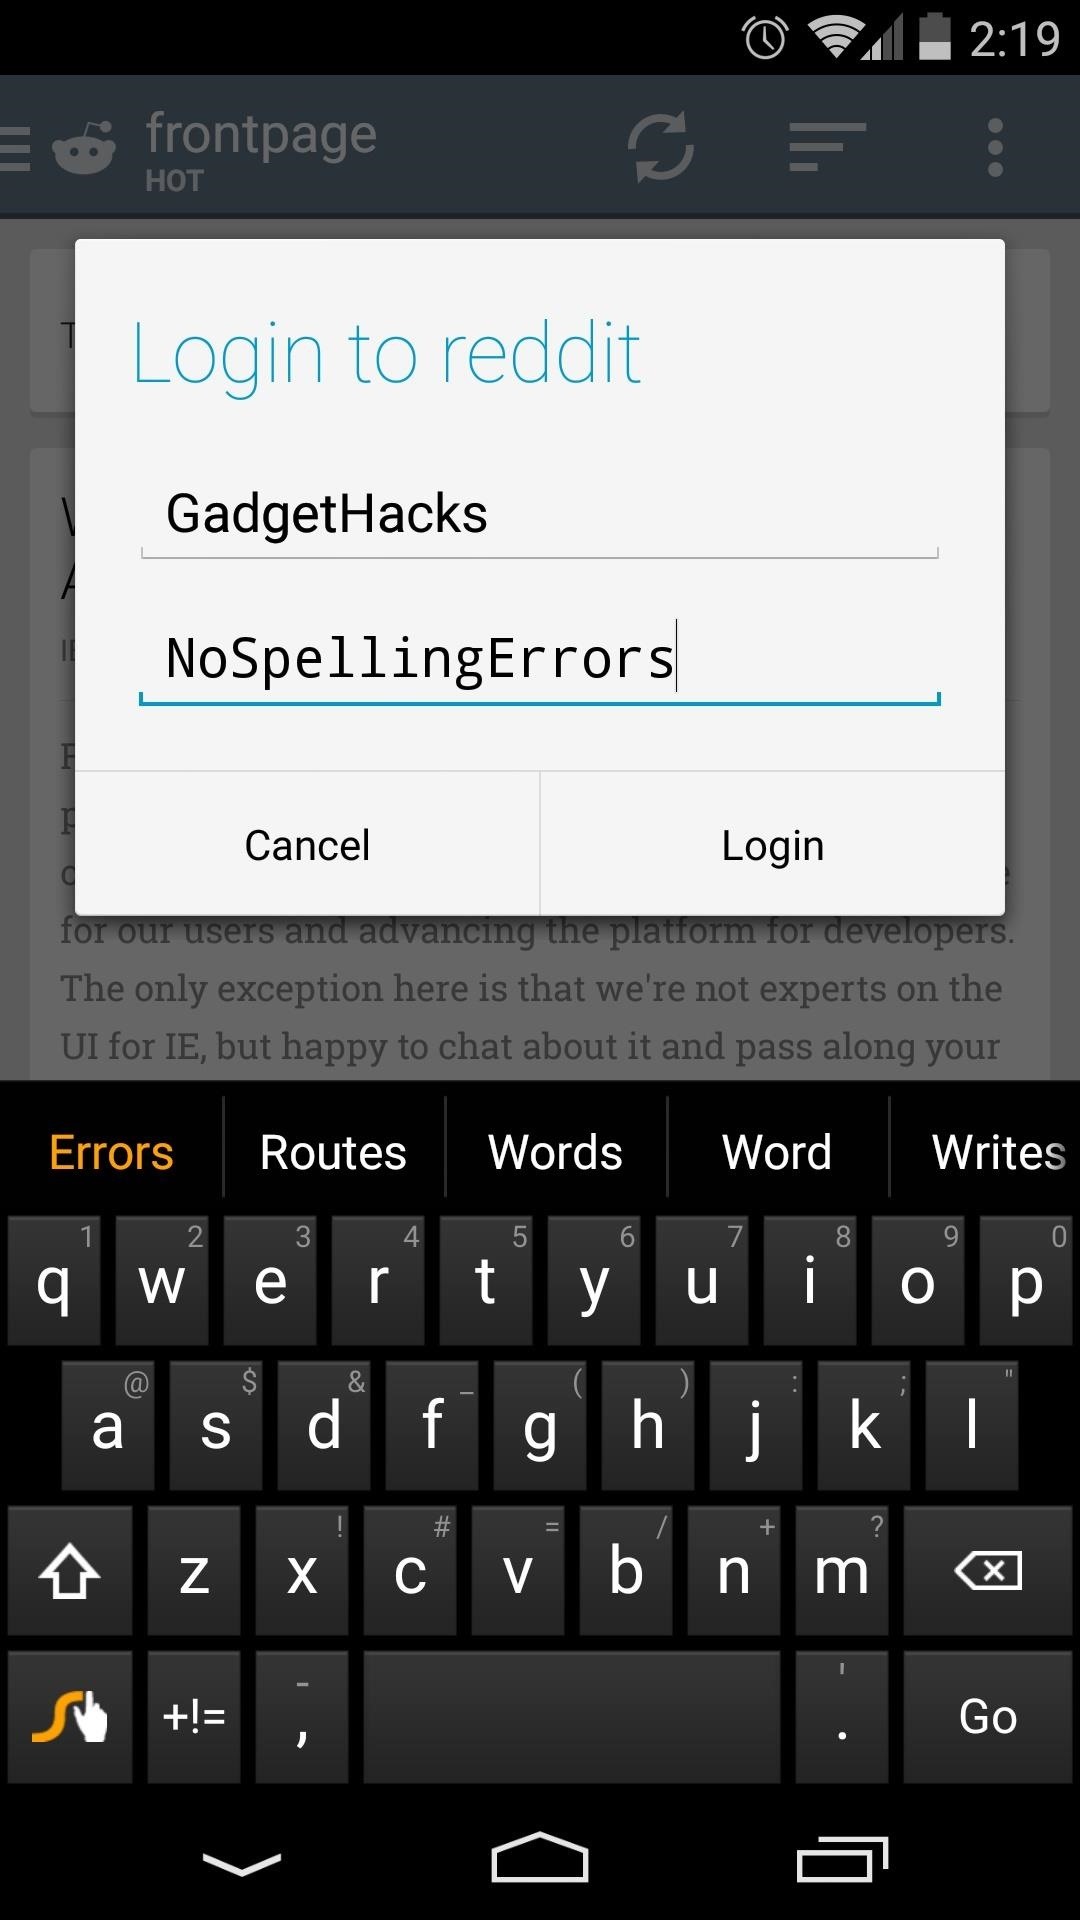 Remove Password Obfuscation from Your Nexus 5 for Easier App Logins